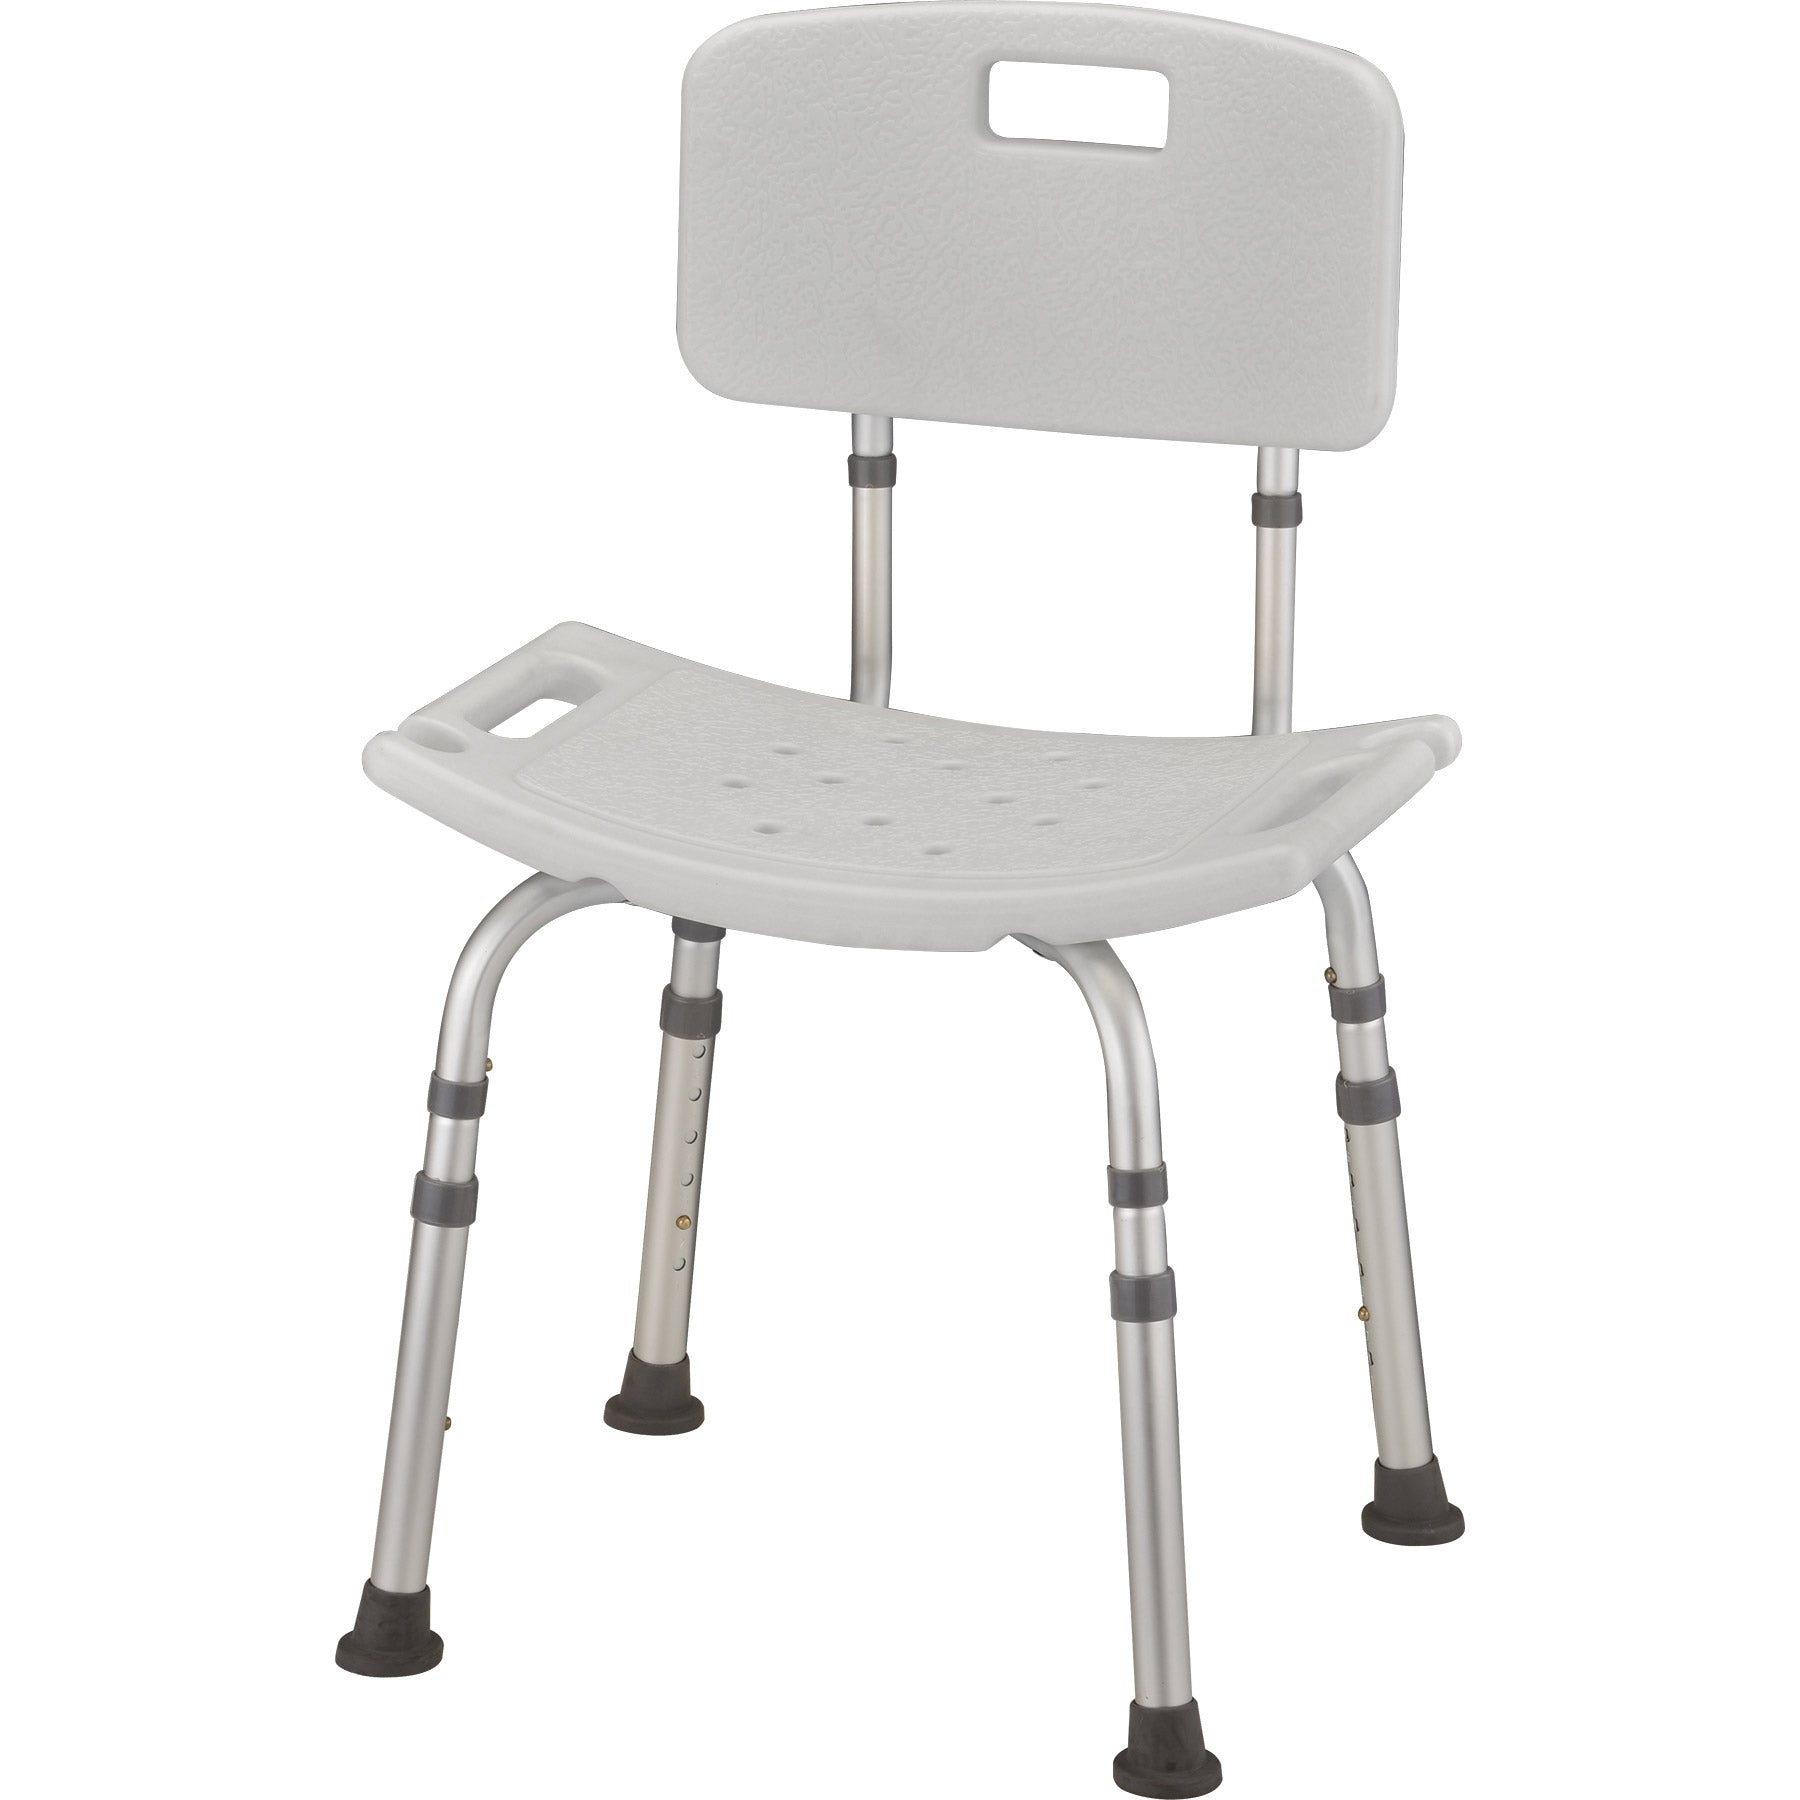 Bath Seat with Back and No Handles